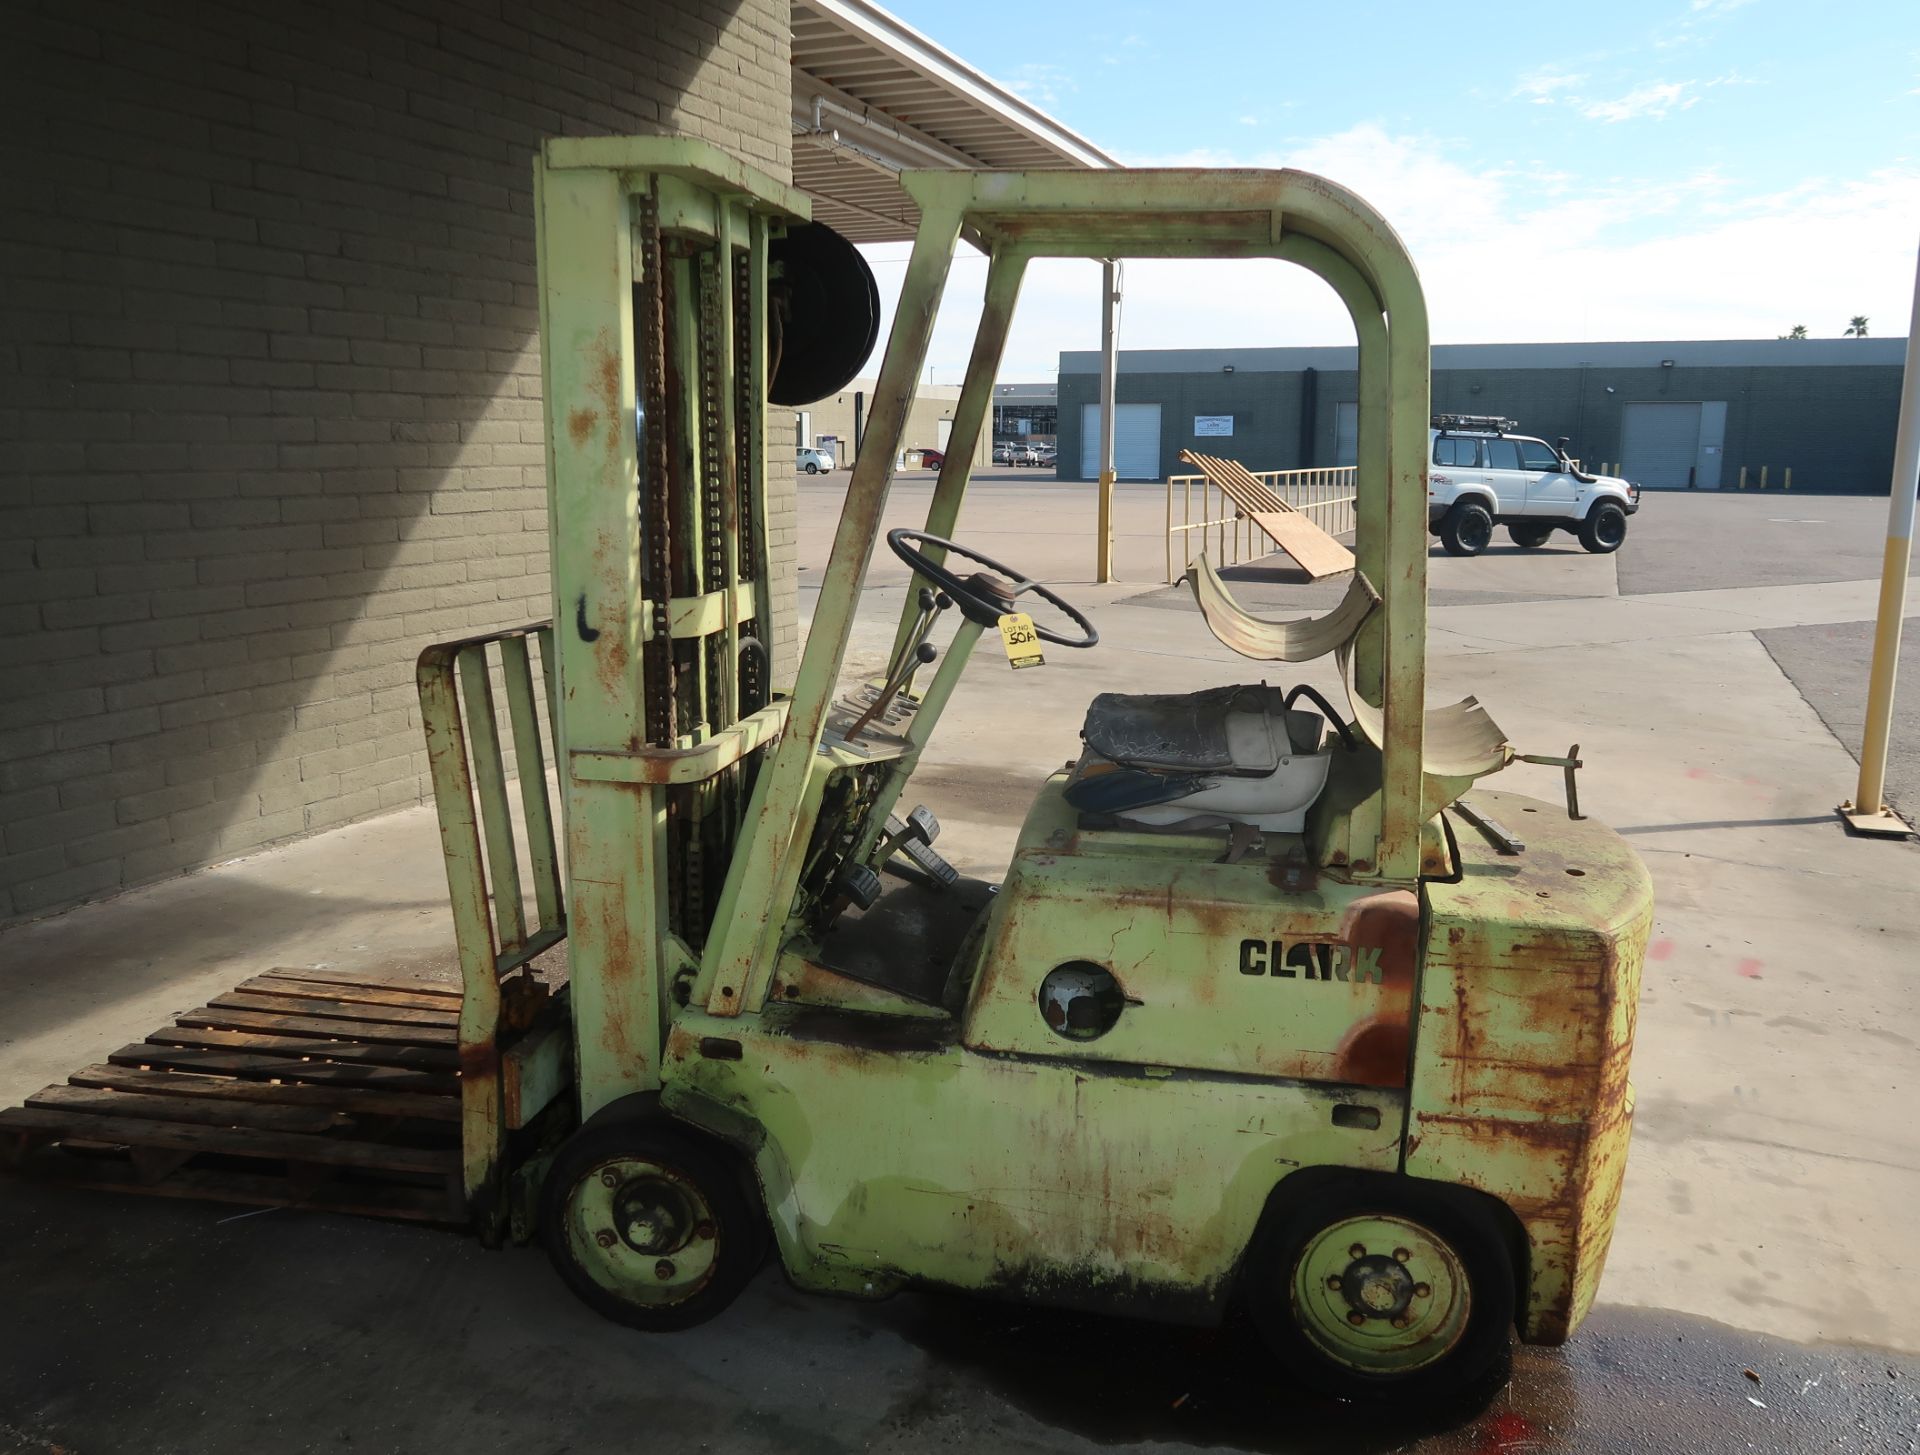 CLARK PROPANE FORKLIFT, CUSHION TIRE, SIDE SHIFT, 2-STAGE MAST, SHOWS 2783 HRS, (GUESSING 3000#